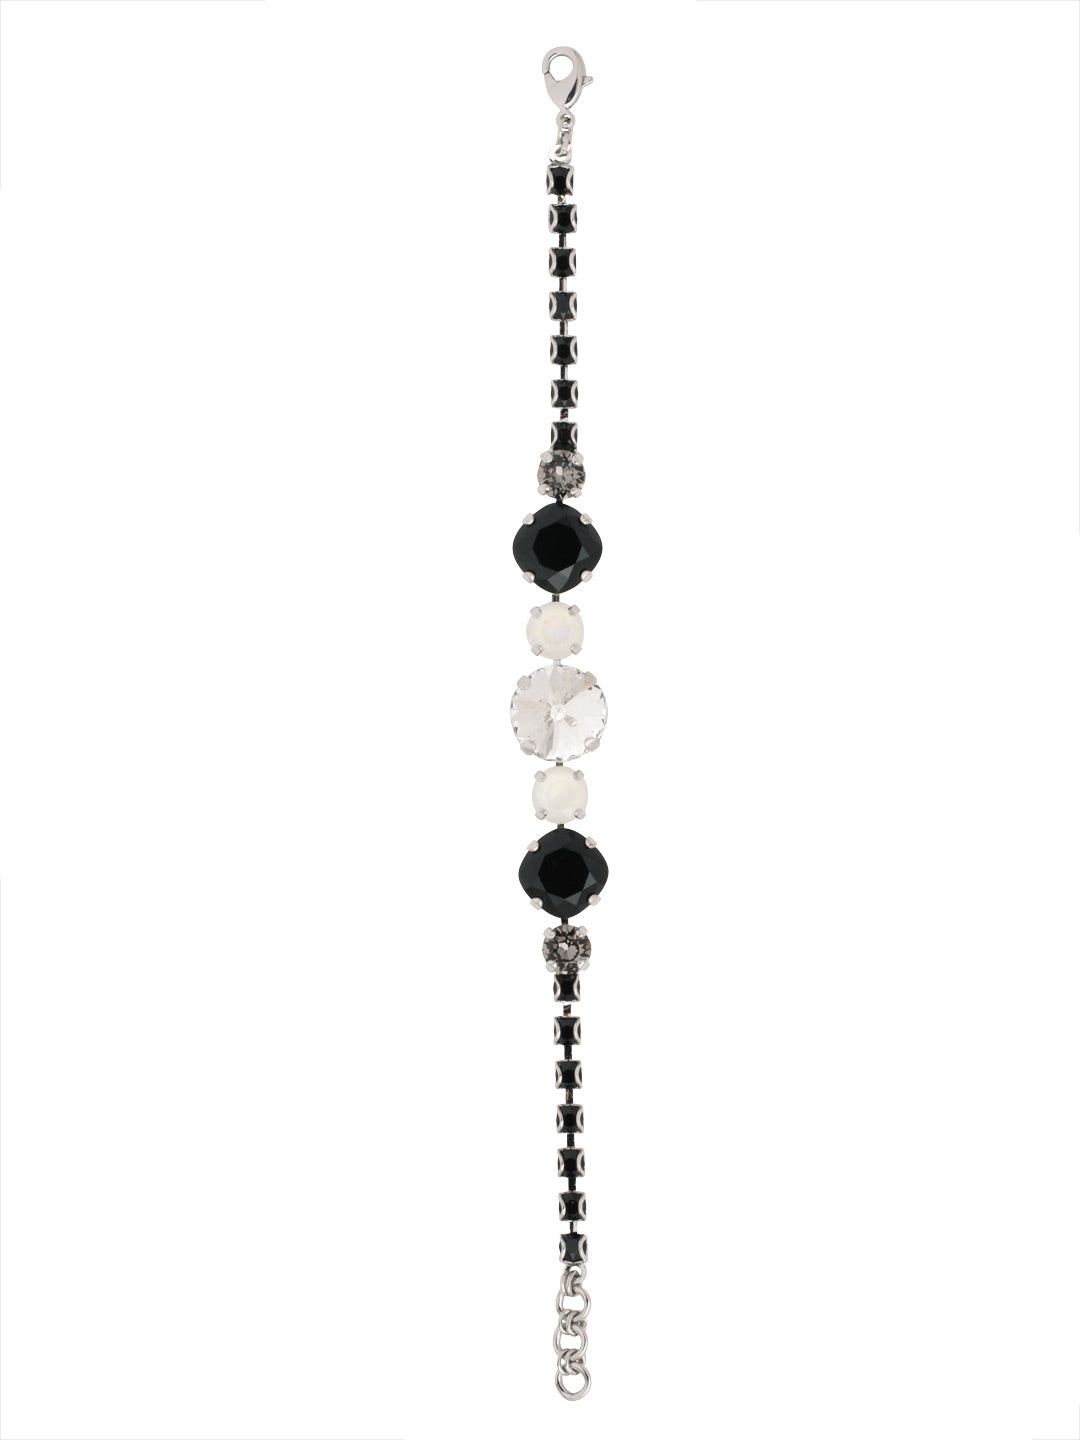 Half Circle Tennis Bracelet - BEY52PDSNI - <p>The Half Circle Tennis Bracelet adds the perfect amount of sparkle to every outfit. A crystal embellished chain connects varying sizes and colors of crystals with a lobster clasp closure. From Sorrelli's Starry Night collection in our Palladium finish.</p>